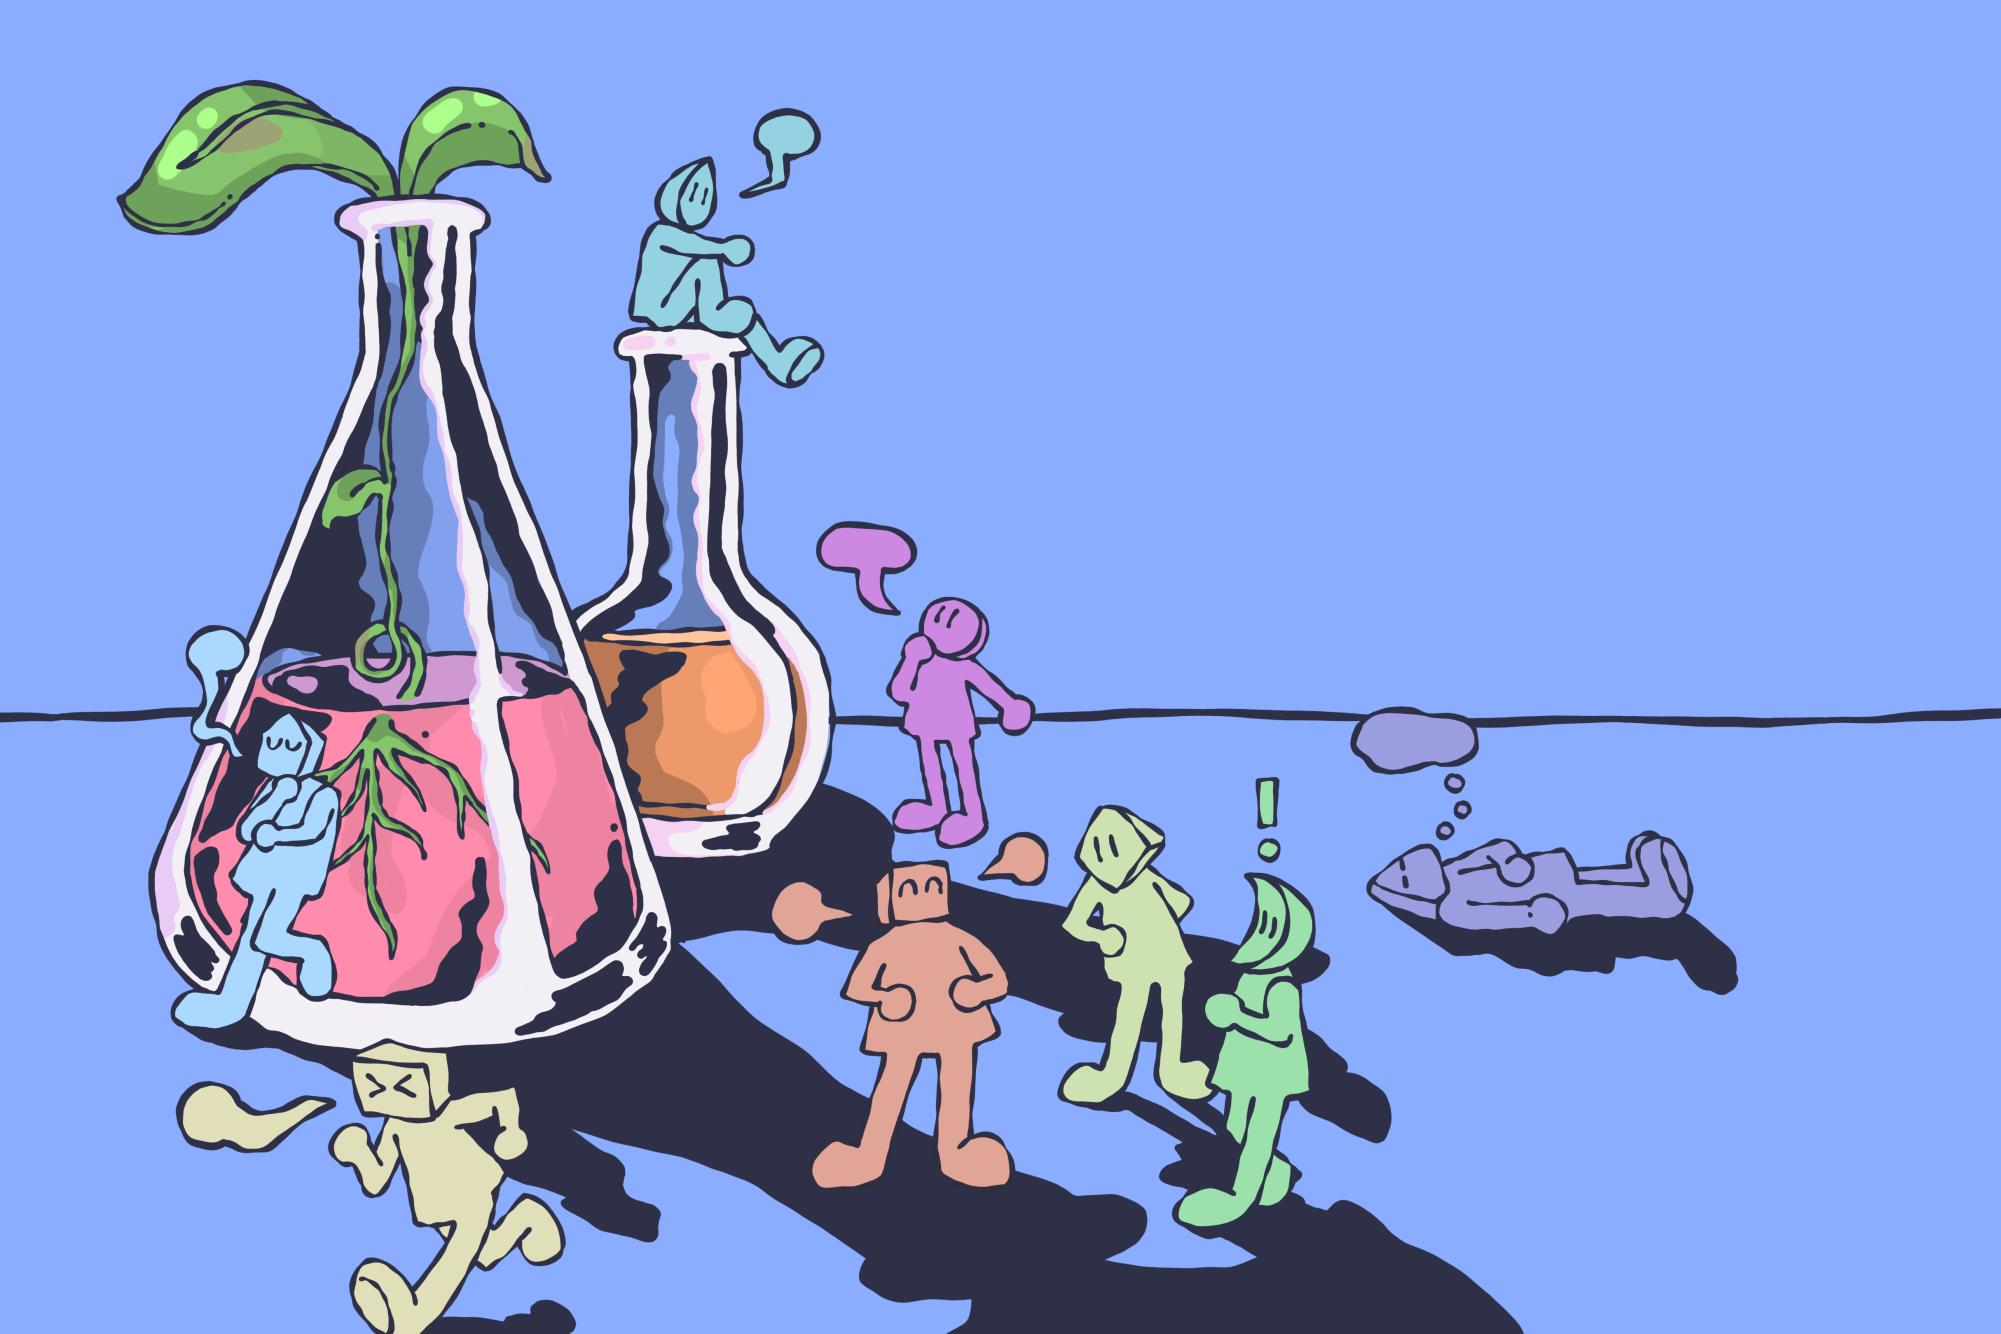 An illustration of a volumetric flask with orange liquid in it and a conical flask with pink liquid and a green plant growing inside of it. Various tiny people drawn in a simplistic, blocky style congregate around the flasks with empty speech bubbles floating around their heads.